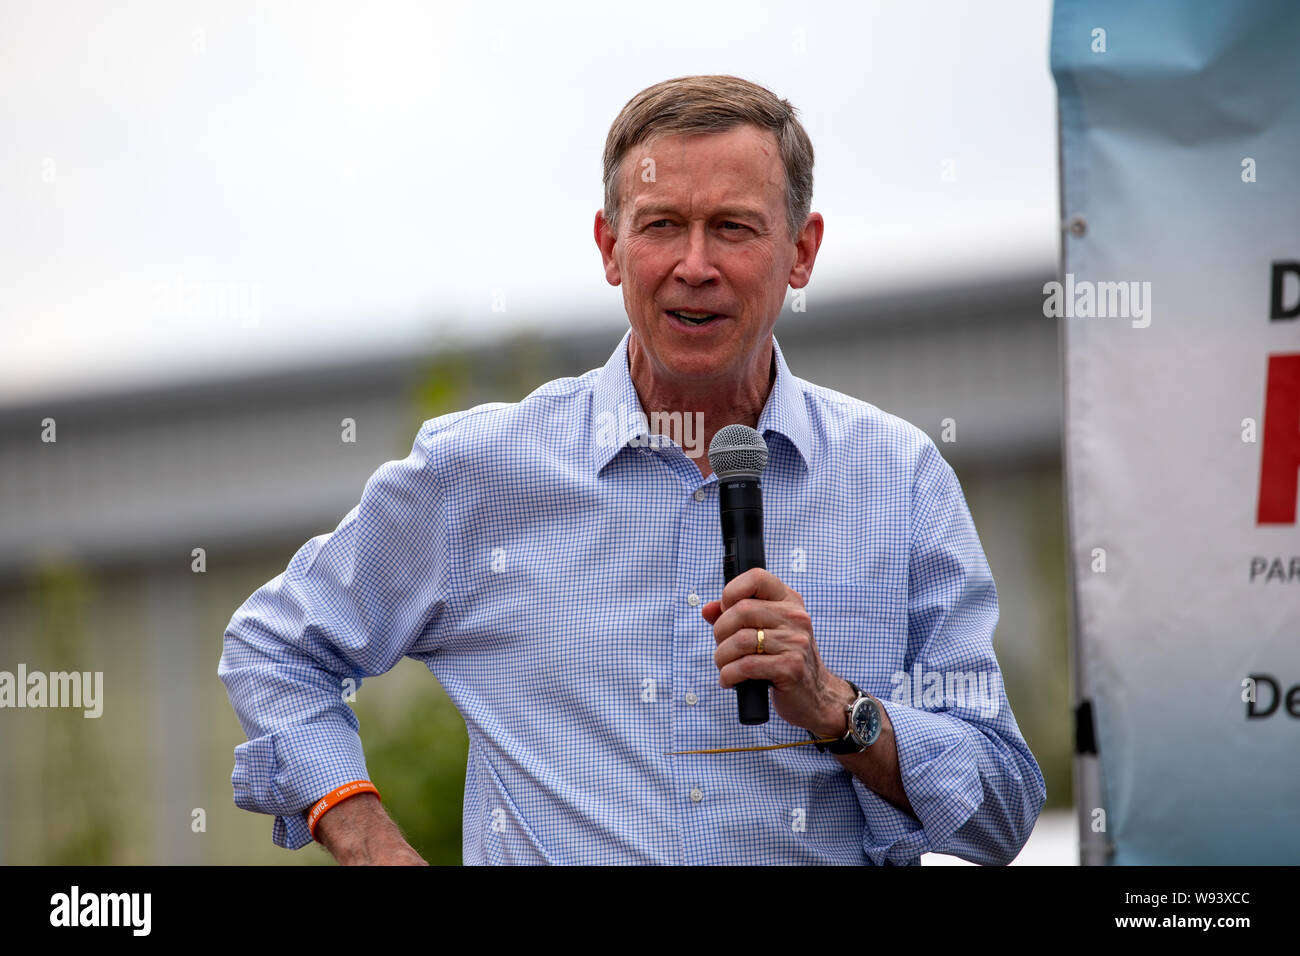 Des Moines, Iowa / USA - August 10, 2019: Colorado Governor and Democratic presidential candidate John Hickenlooper greets supporters at the Iowa Stat Stock Photo